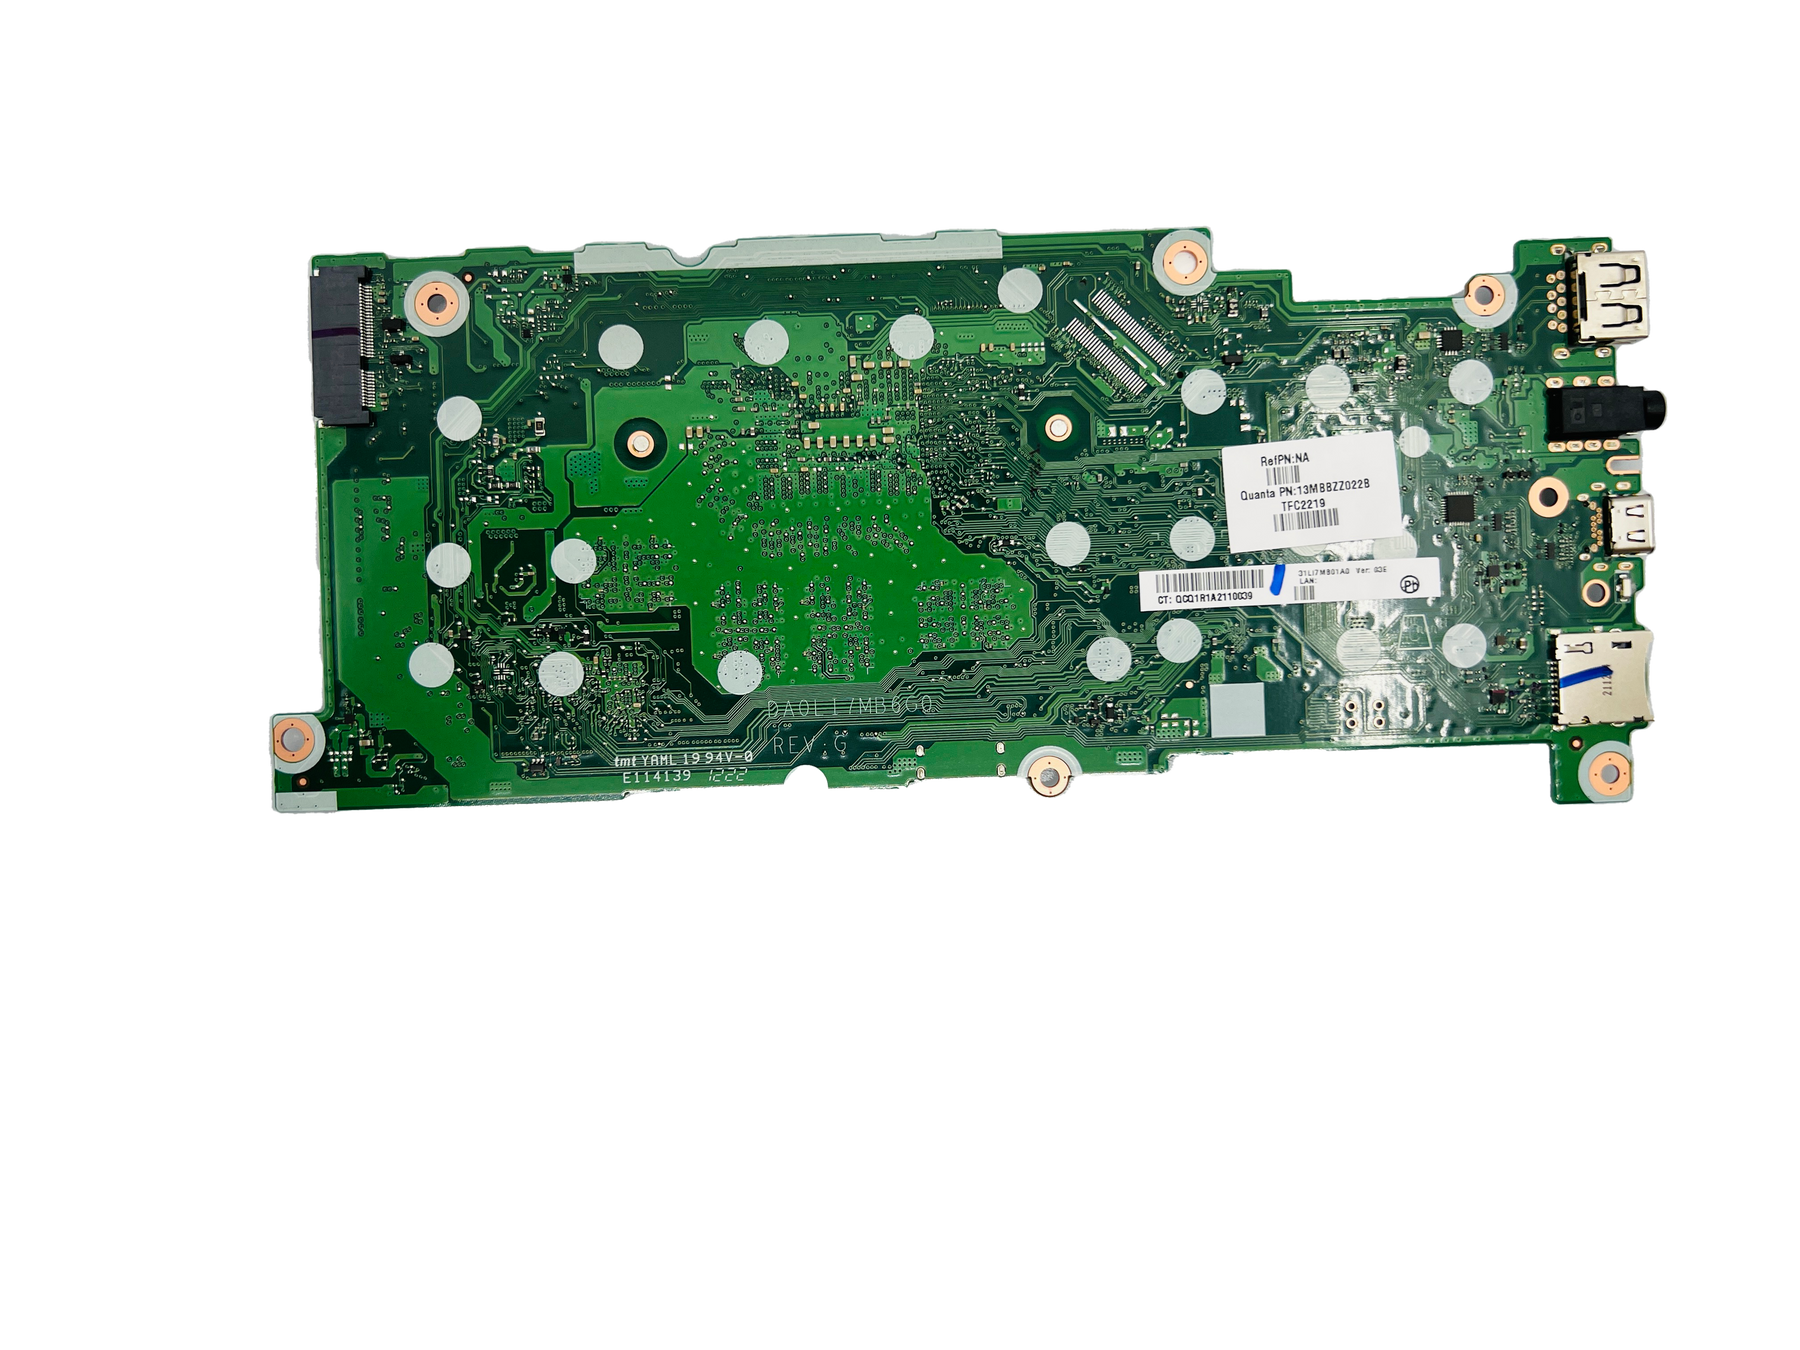 NL72 and NL72L Mainboard (N5100 8/64)